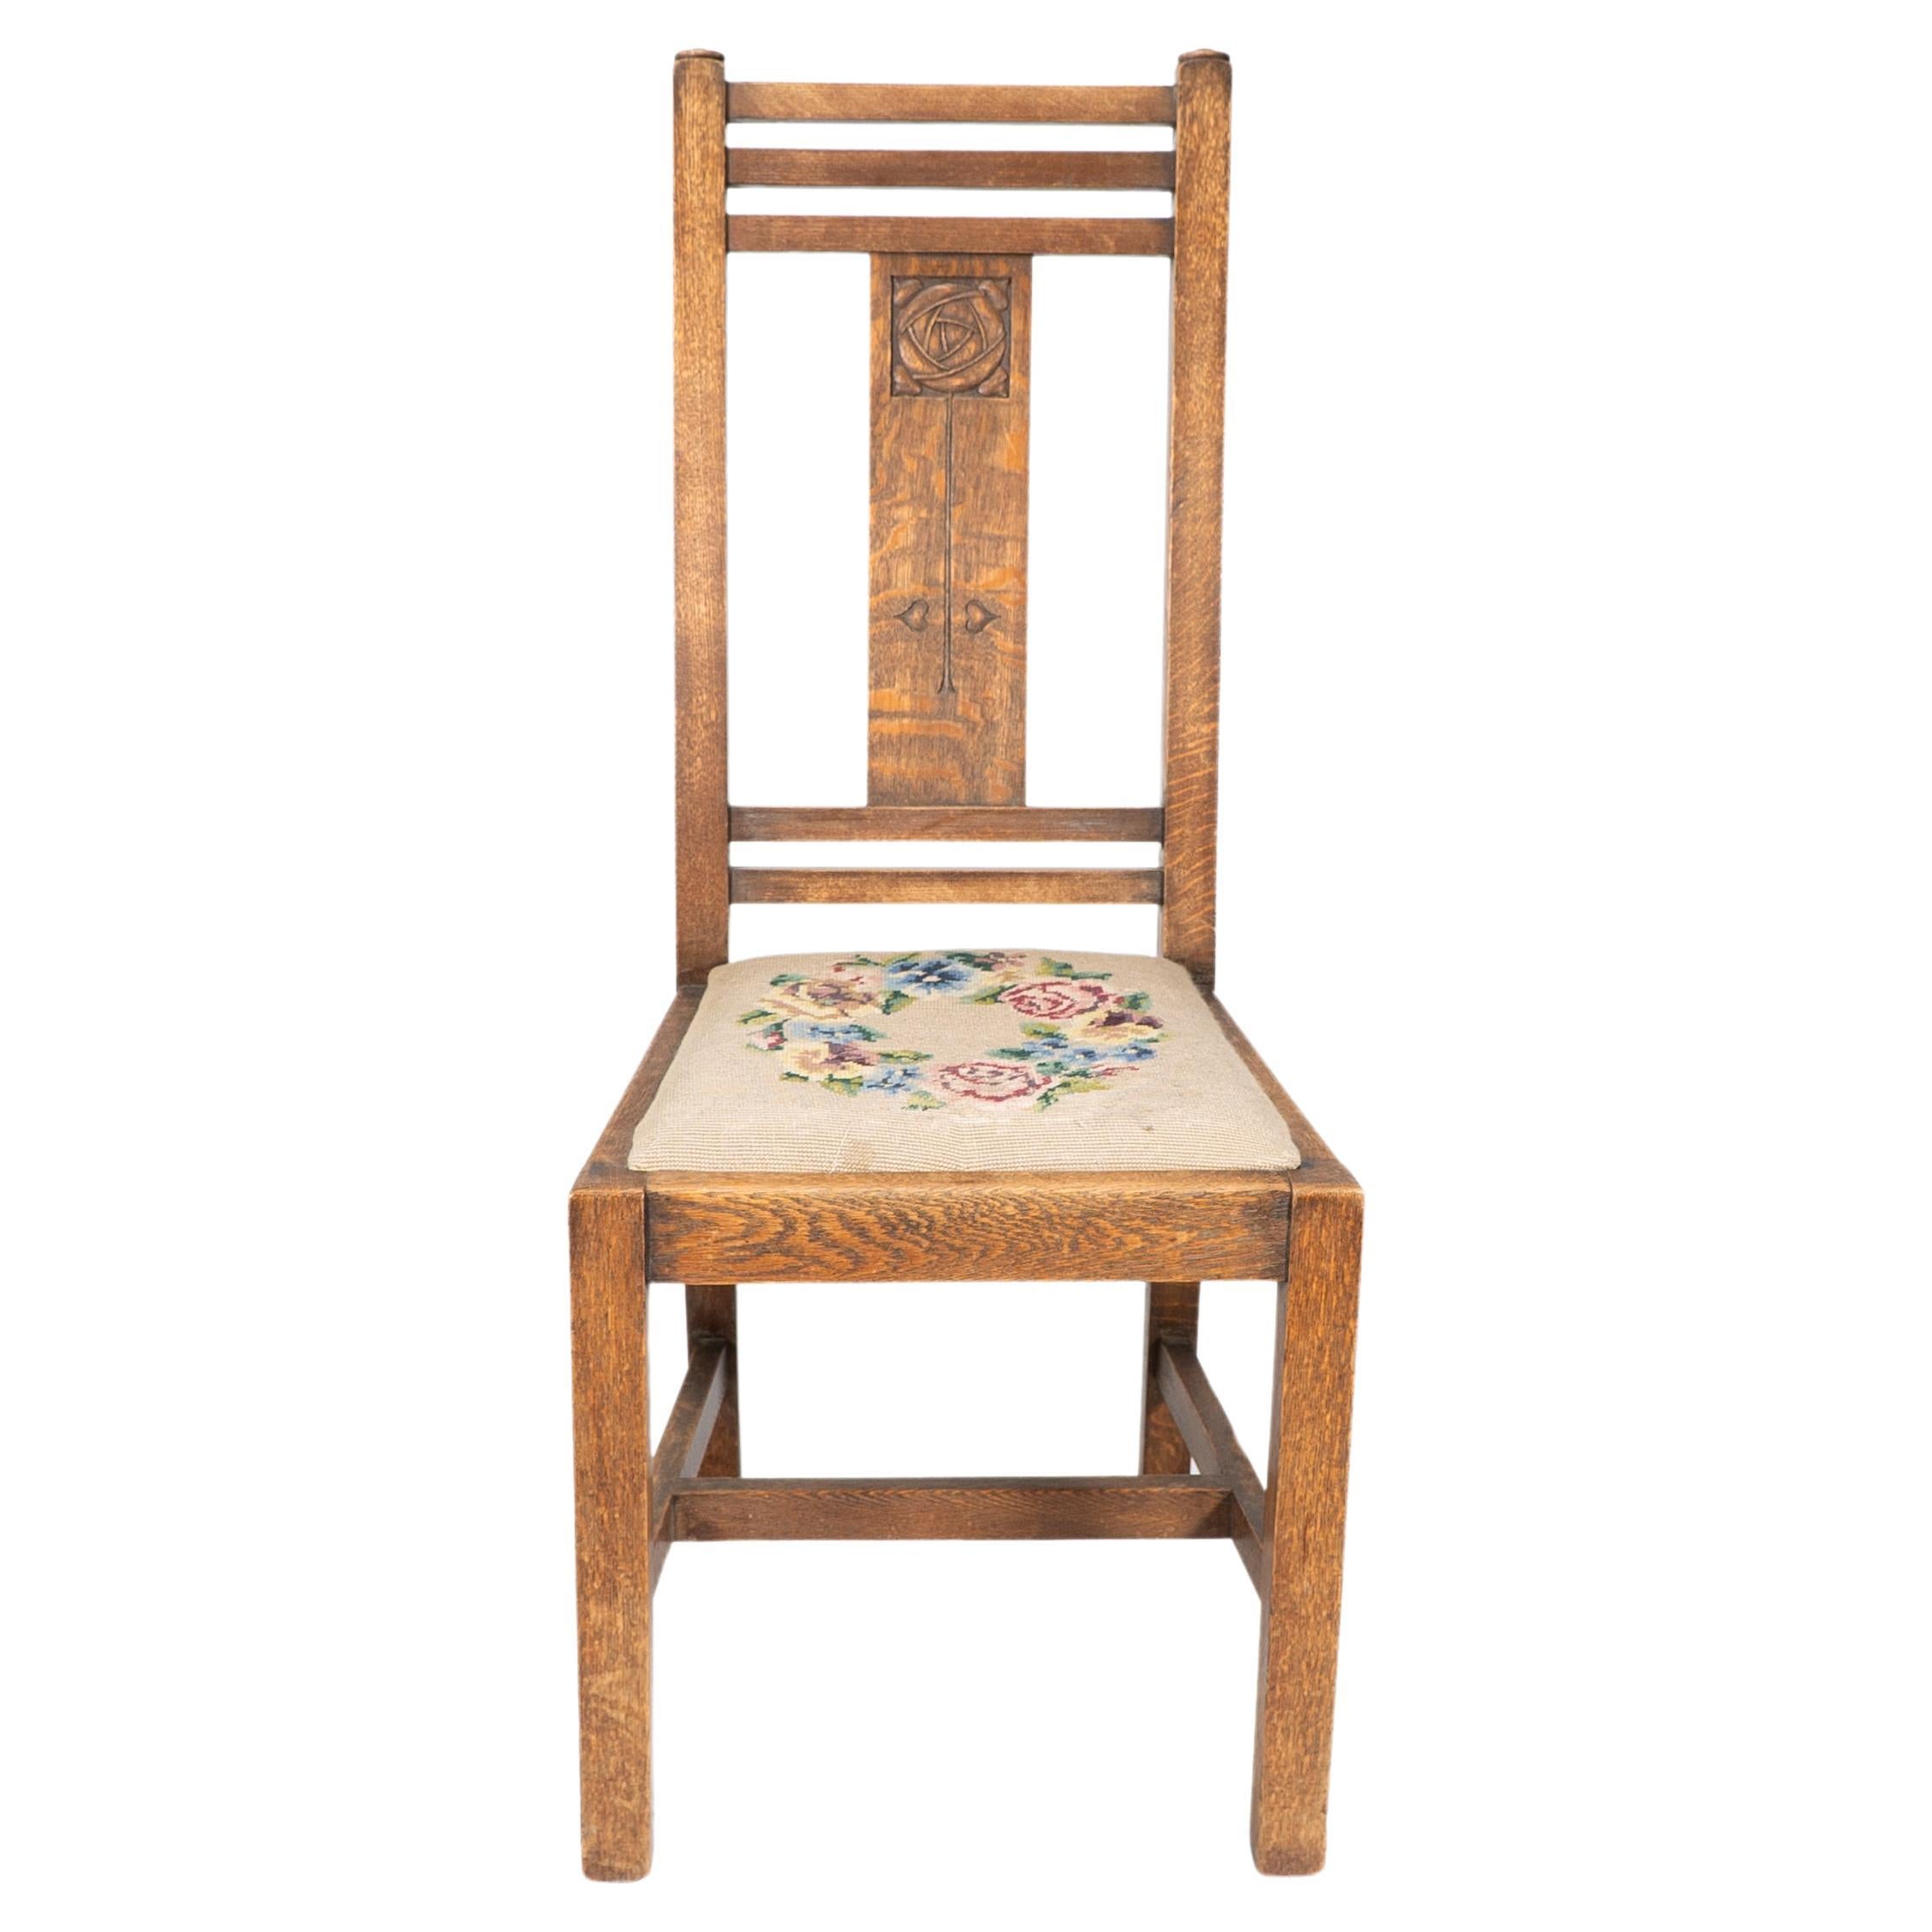 Liberty and Co. An Arts and Crafts oak chair with carved rose decoration to the back, the drop-in seat with colorful embroidery. We also have a matching Liberty and Co gate leg dining table available in another listing.